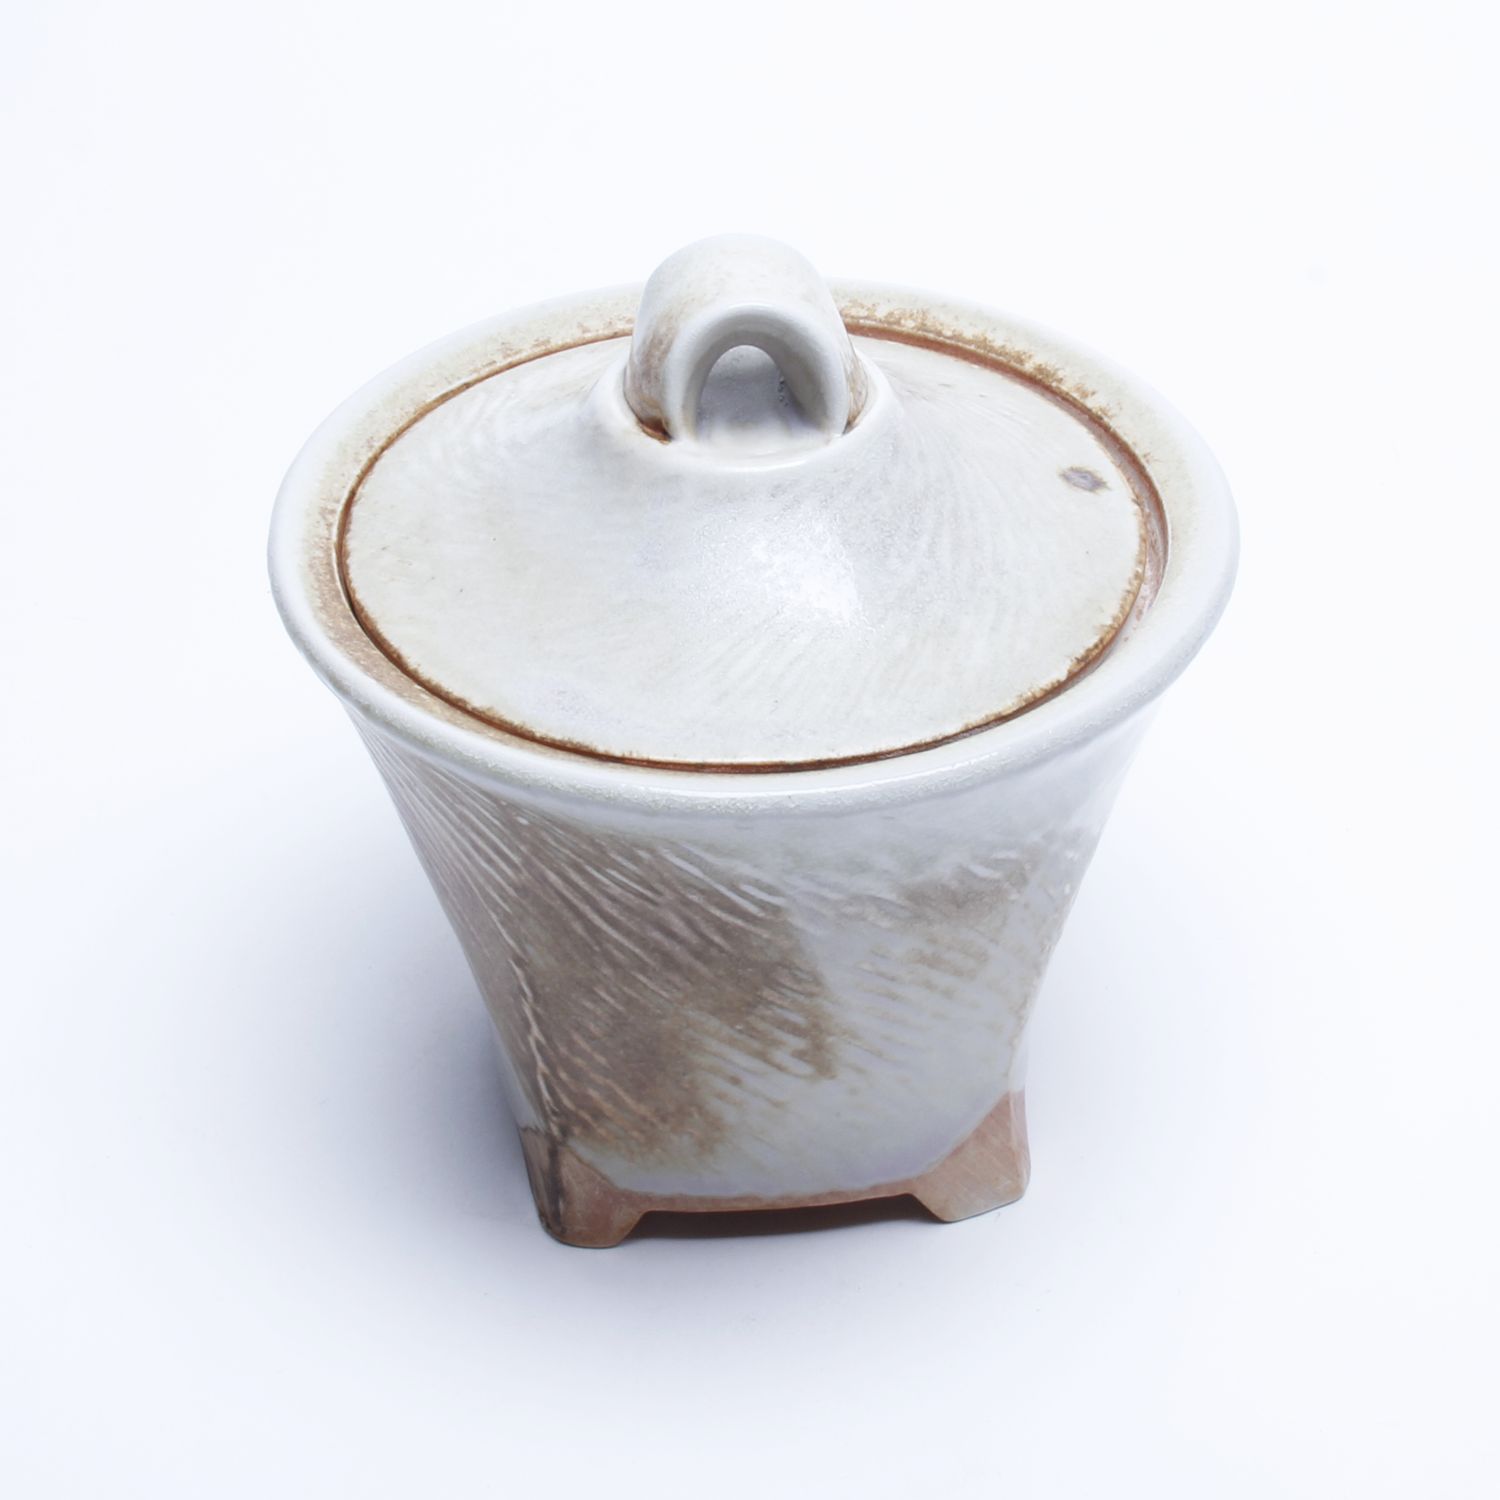 Bruce Cochrane: Tall Footed Jar Product Image 2 of 2